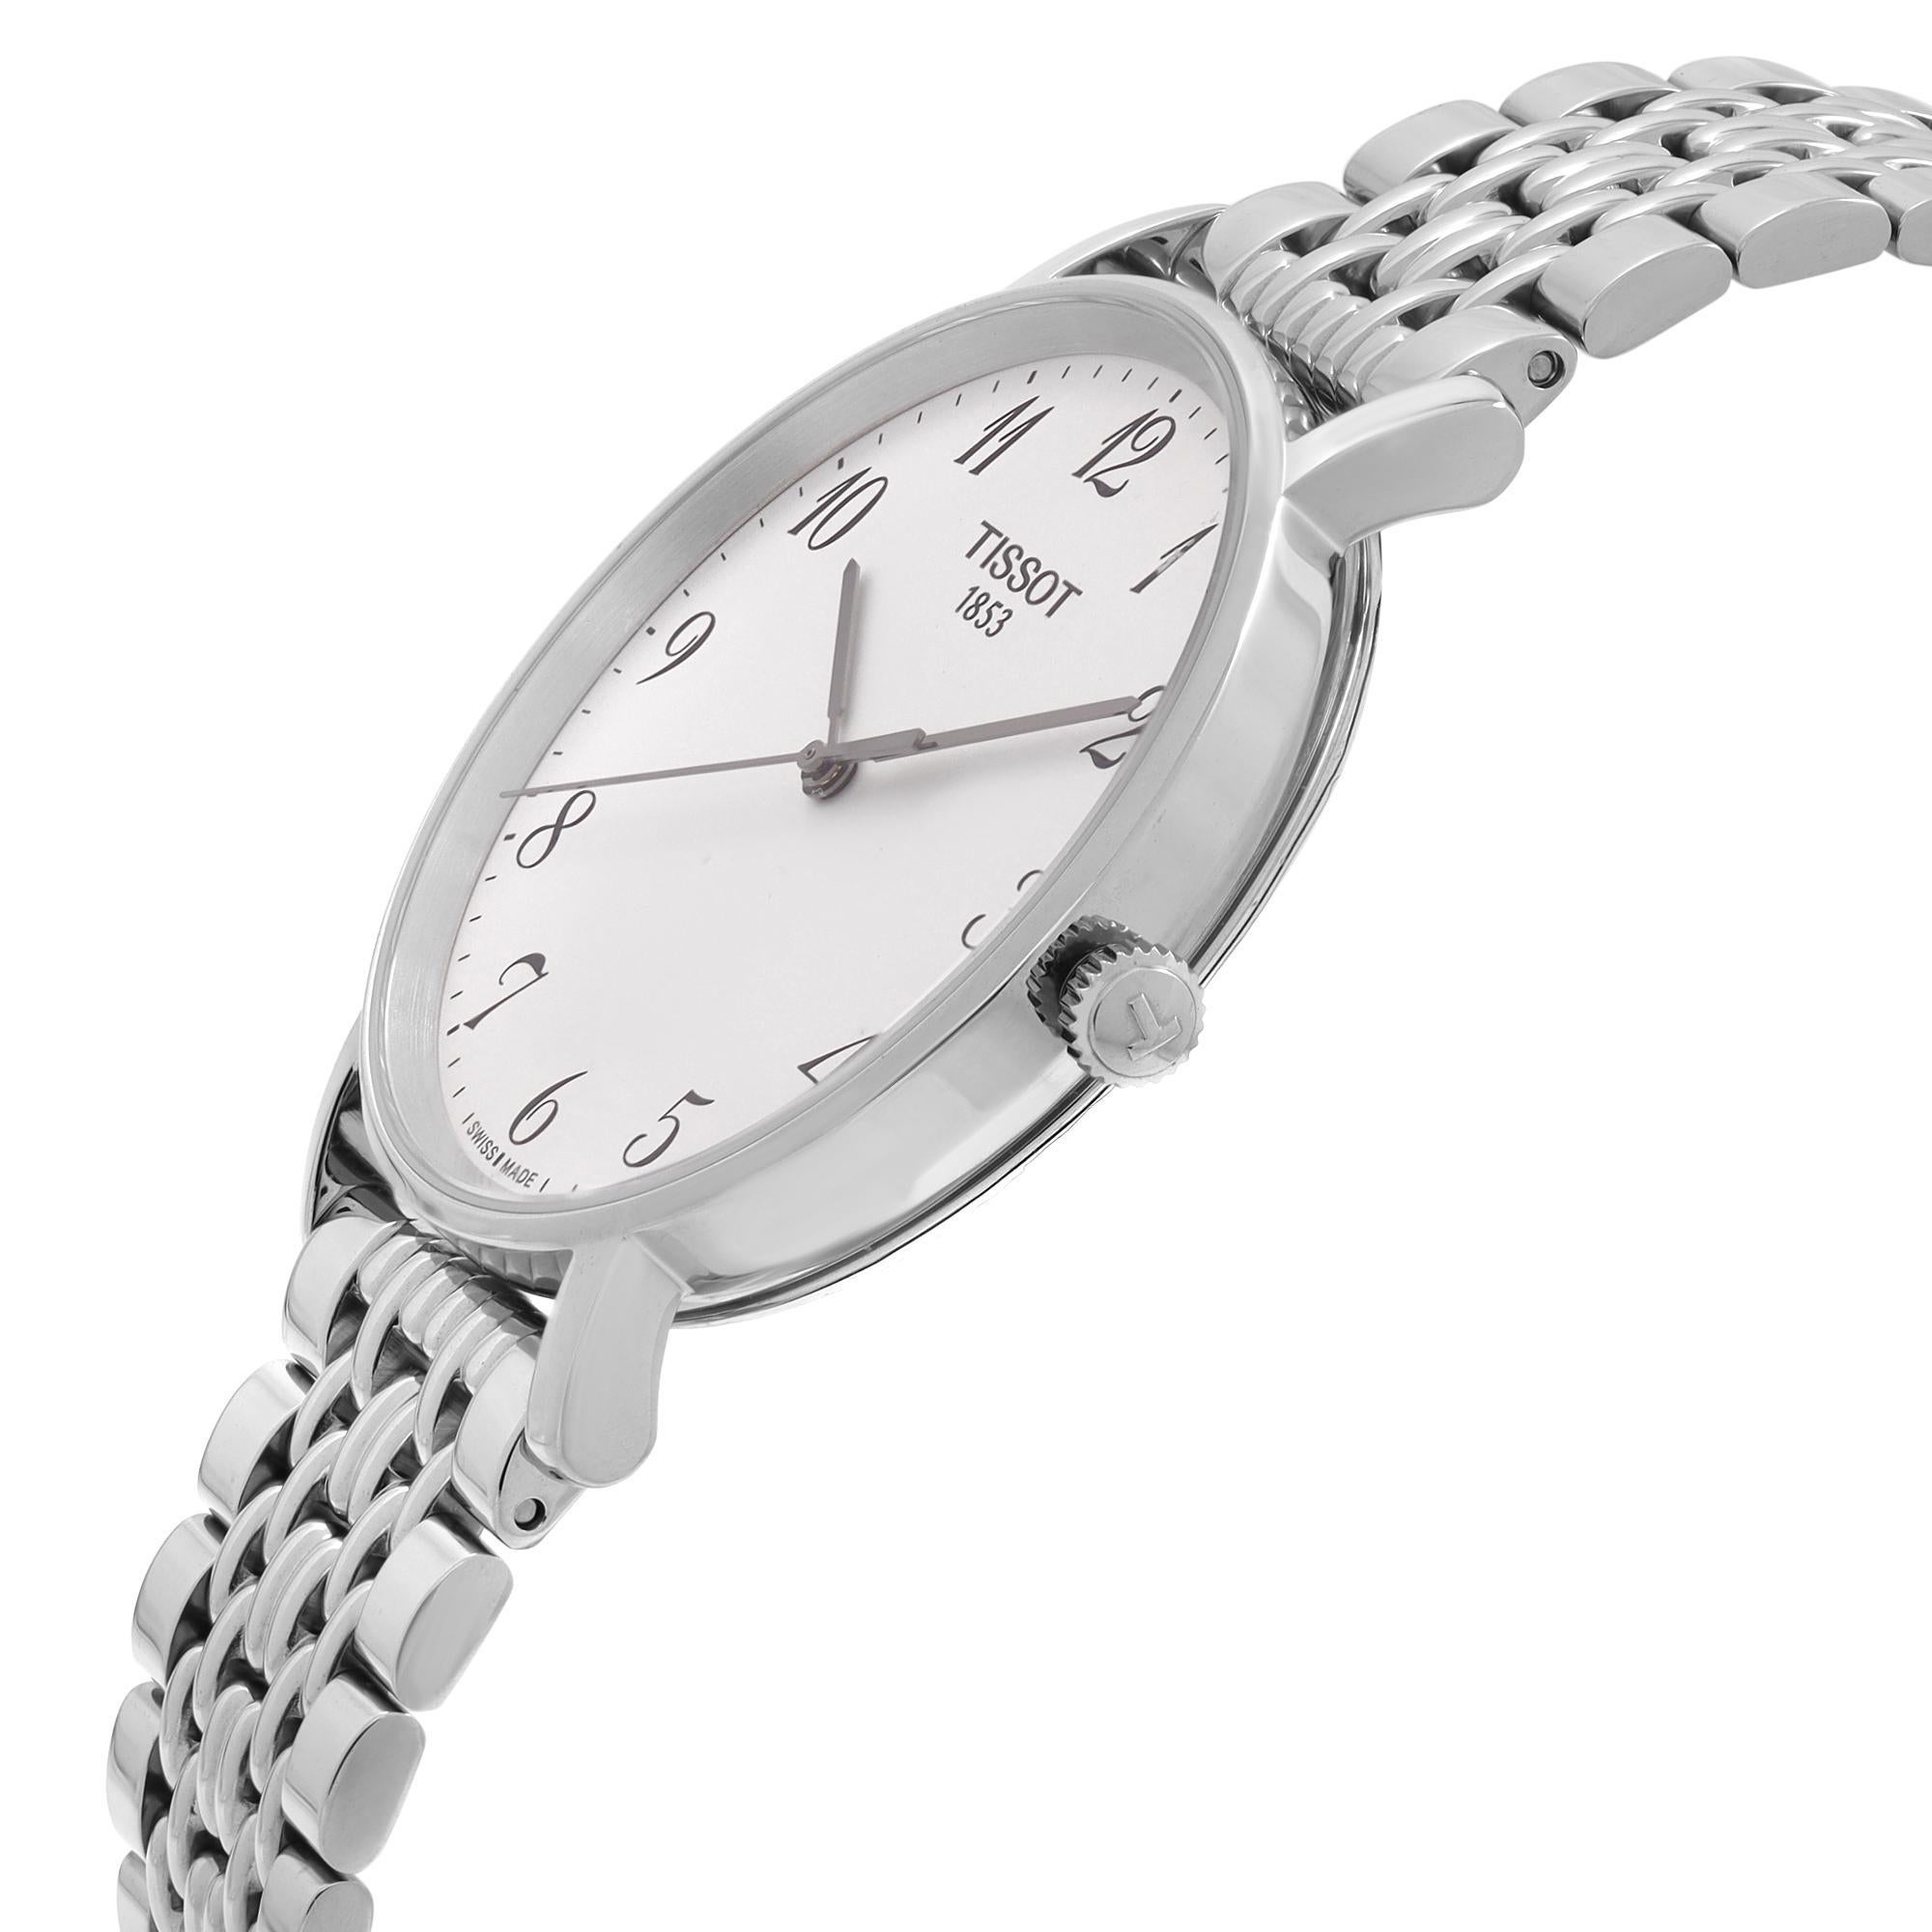 Unworn Tissot T-Classic Unisex Quartz Watch T109.410.11.032.00. This Beautiful Timepiece Features: Stainless Steel Case and Bracelet. Silver Dial with Hour, Minute and Second Hands. This Watch is Water Resistant at 30 meters. Original Box and Papers